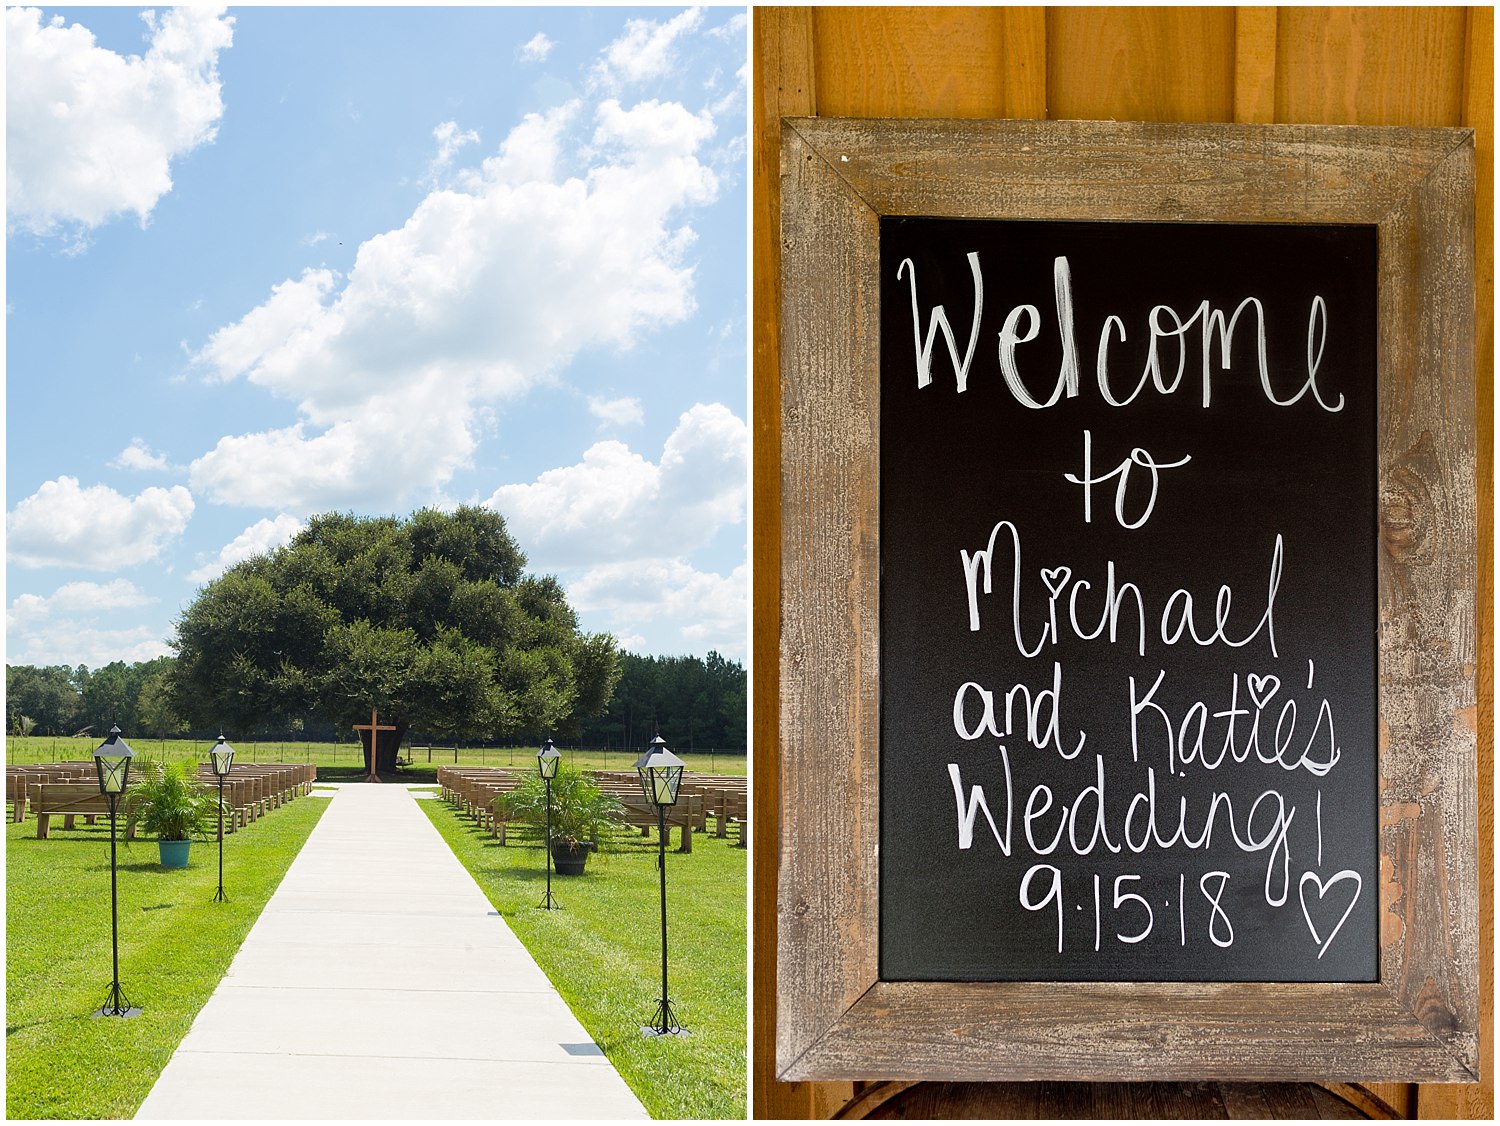 Chalkboard wedding sign and outdoor ceremony site in South Mississippi